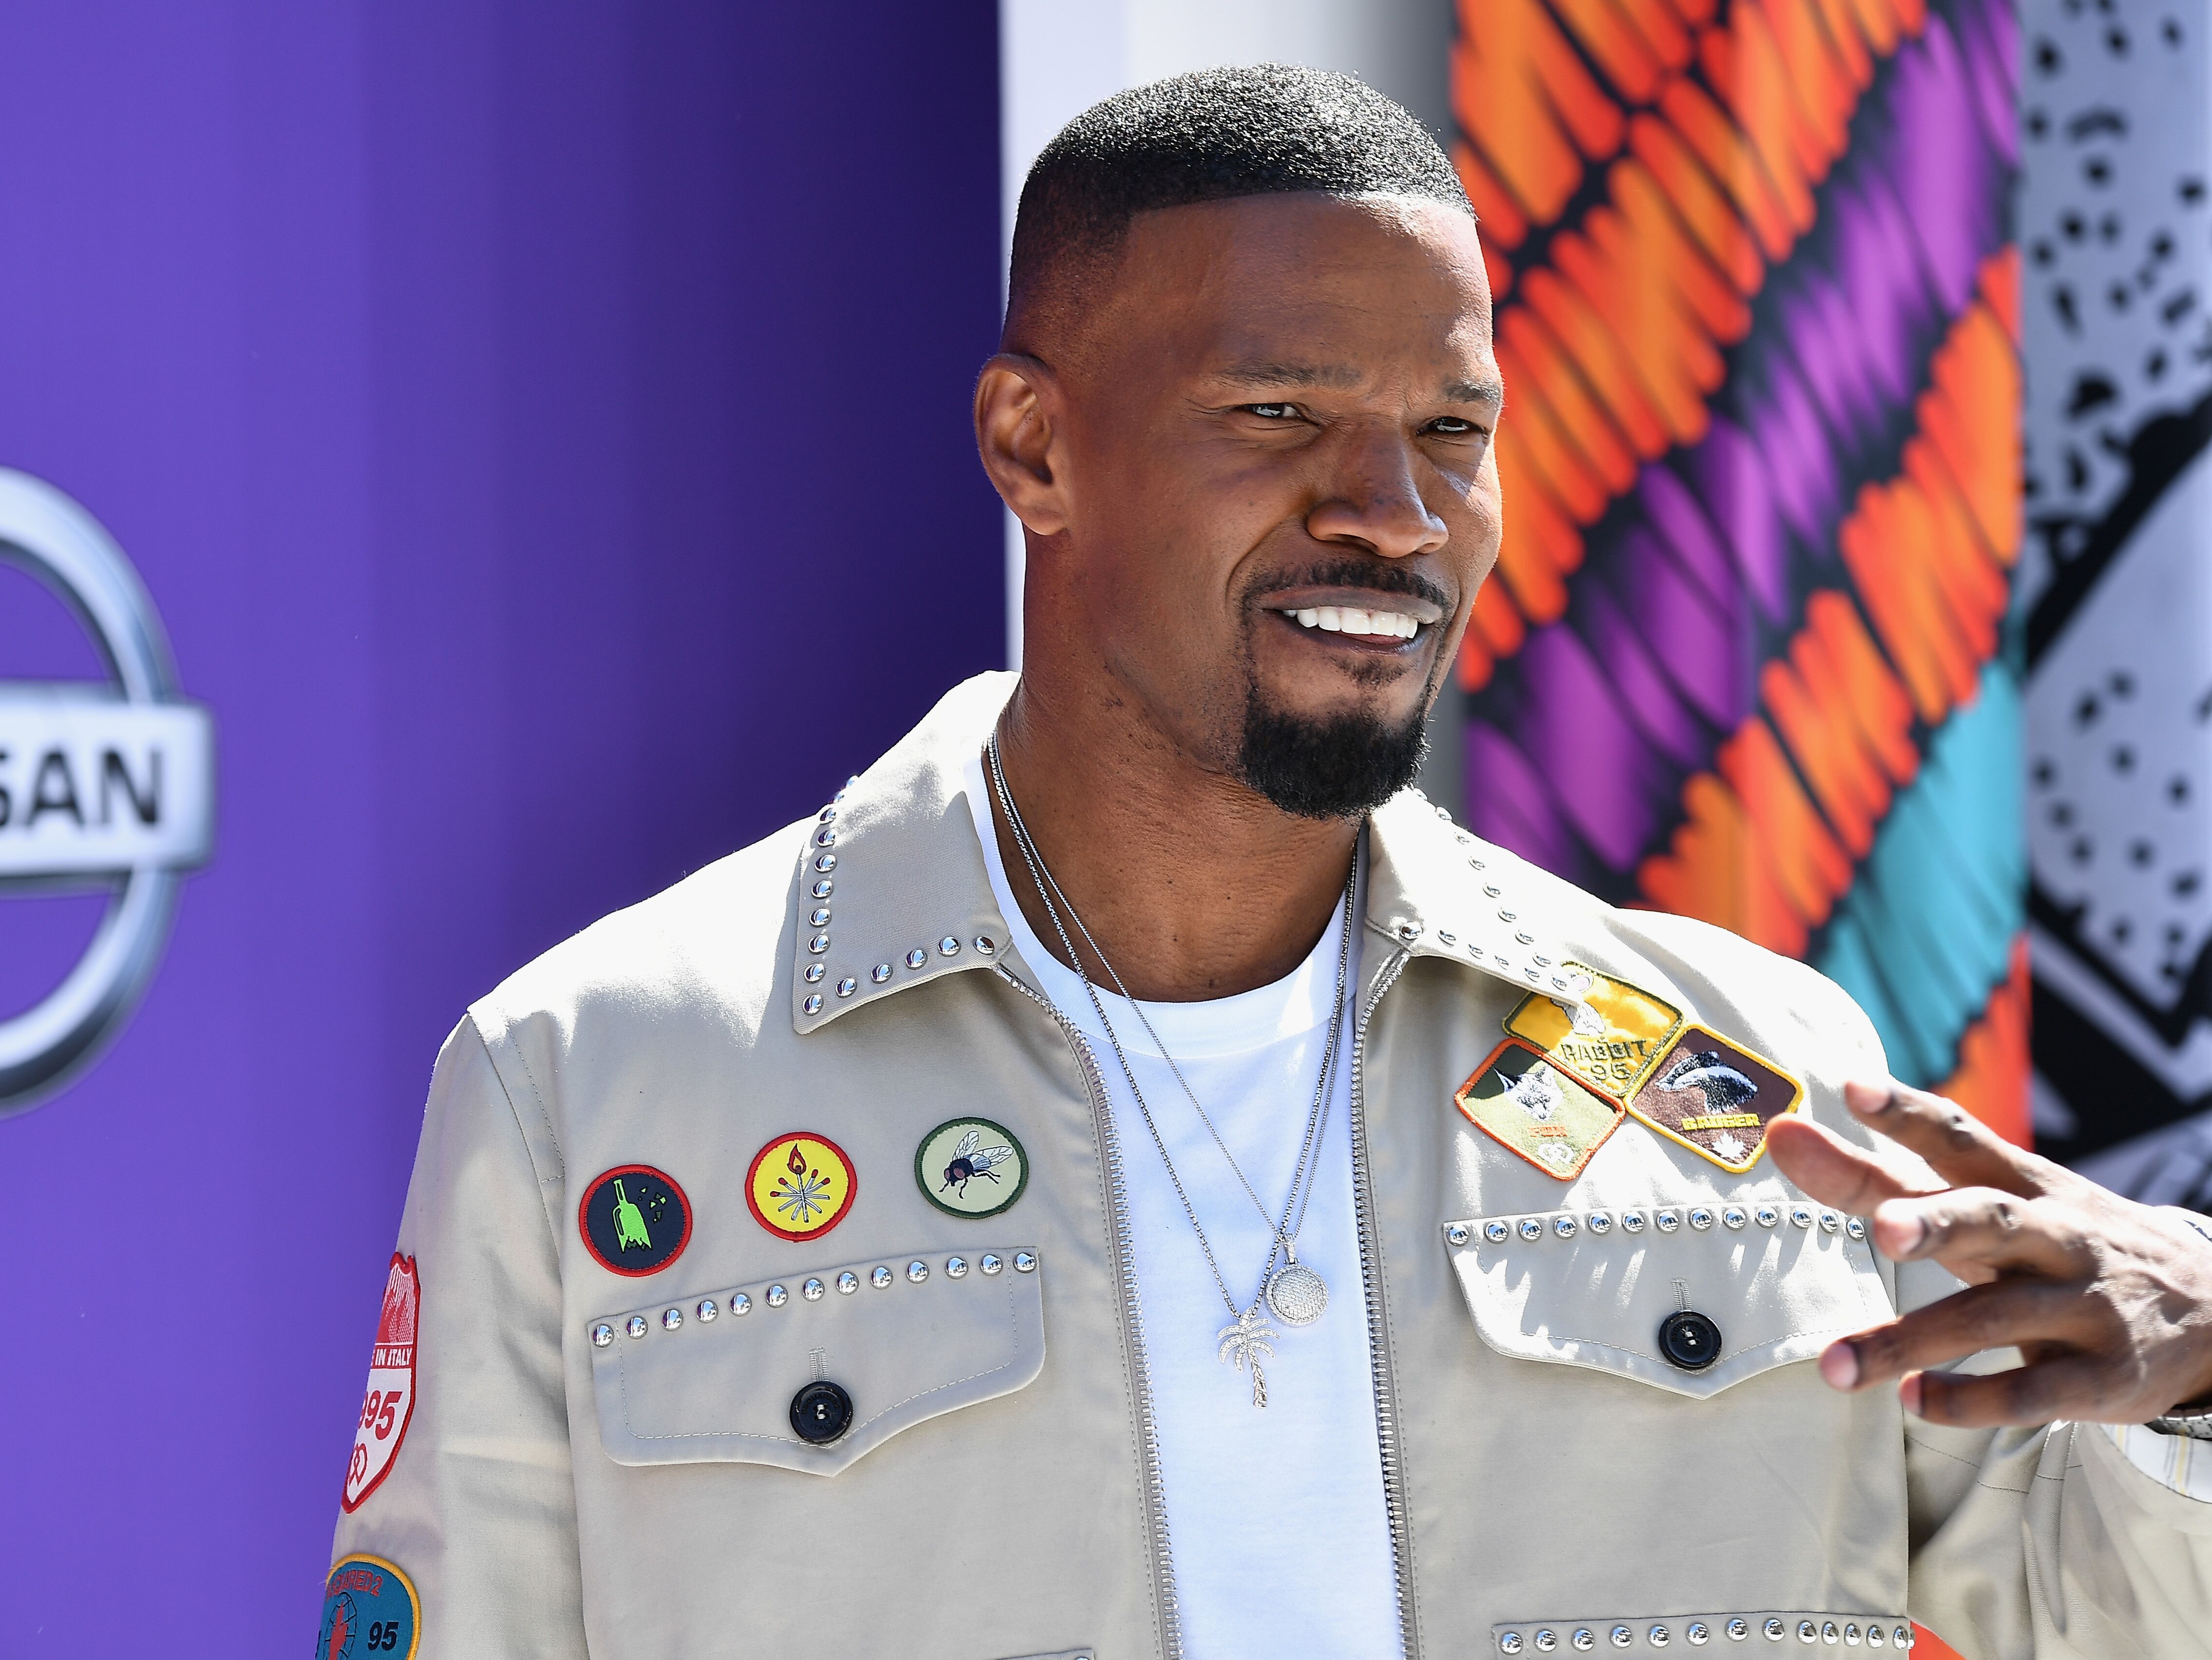 Jamie Foxx attends the 2018 BET Awards at Microsoft Theater | Photo: Getty Images/GlobalImagesUkraine